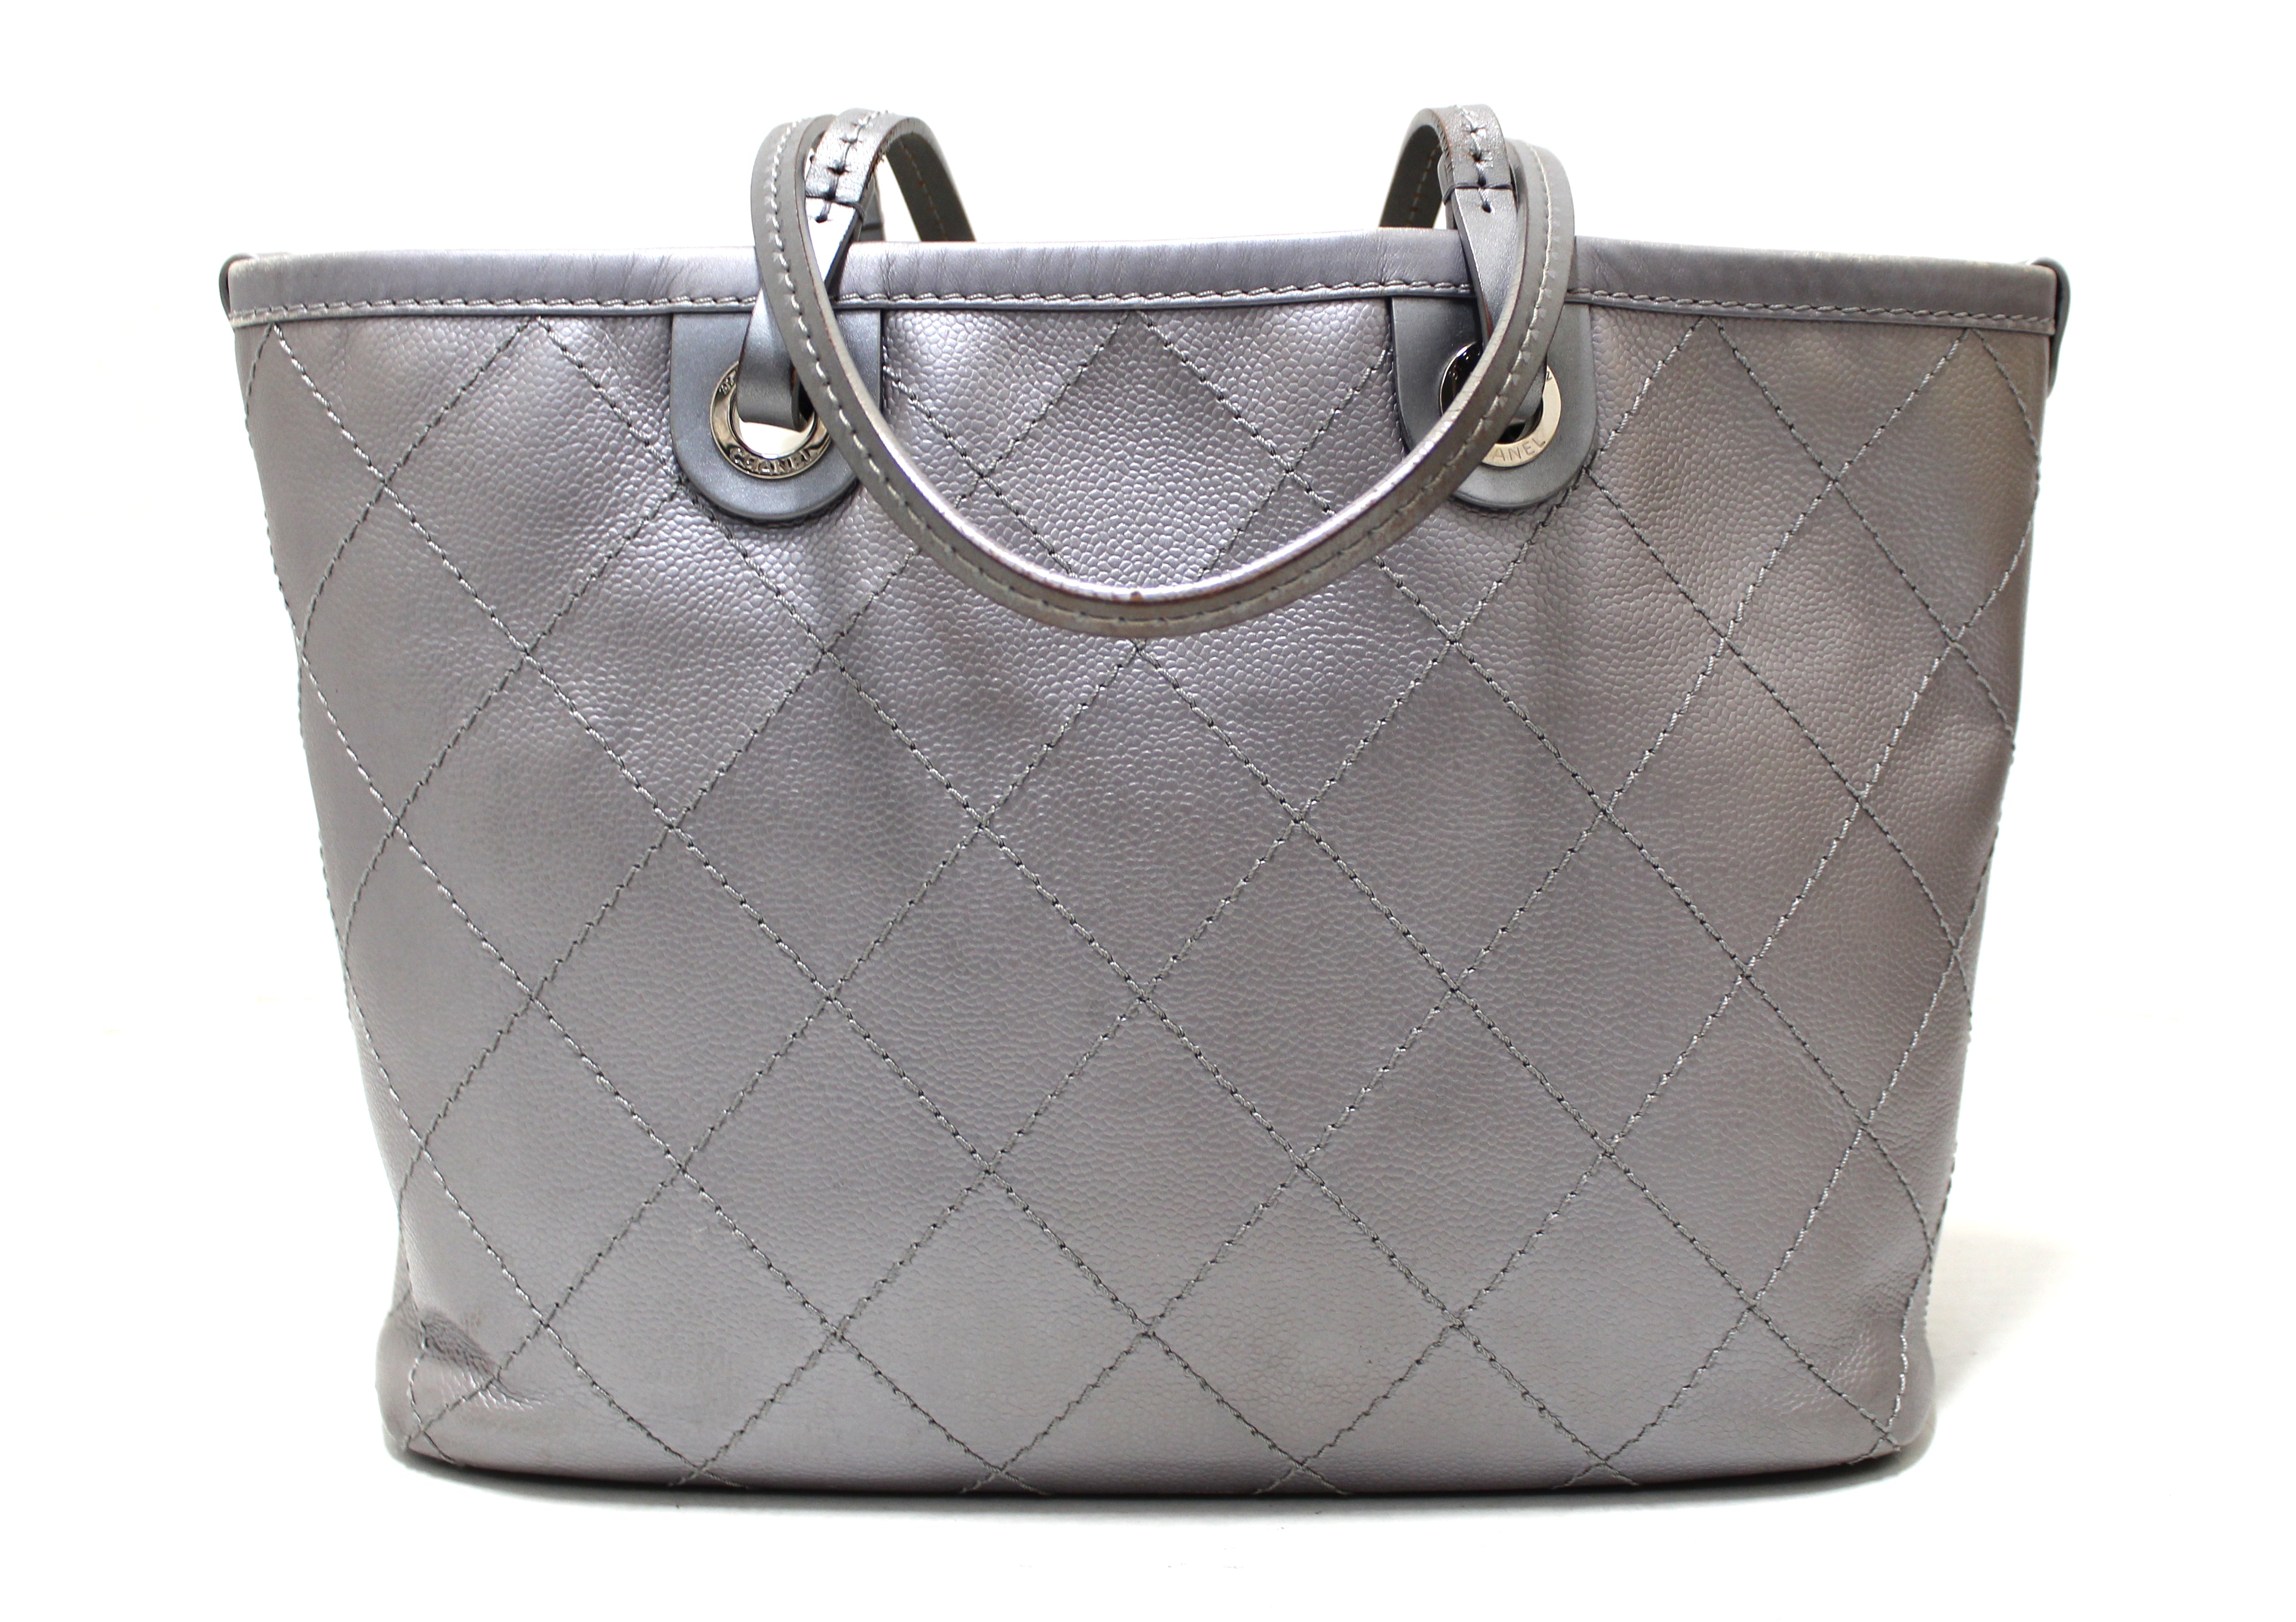 Used Grey Chanel Authentic Vintage Grey Leather Sea Hit Soft Tote  Shoulder Bag Houston,TX